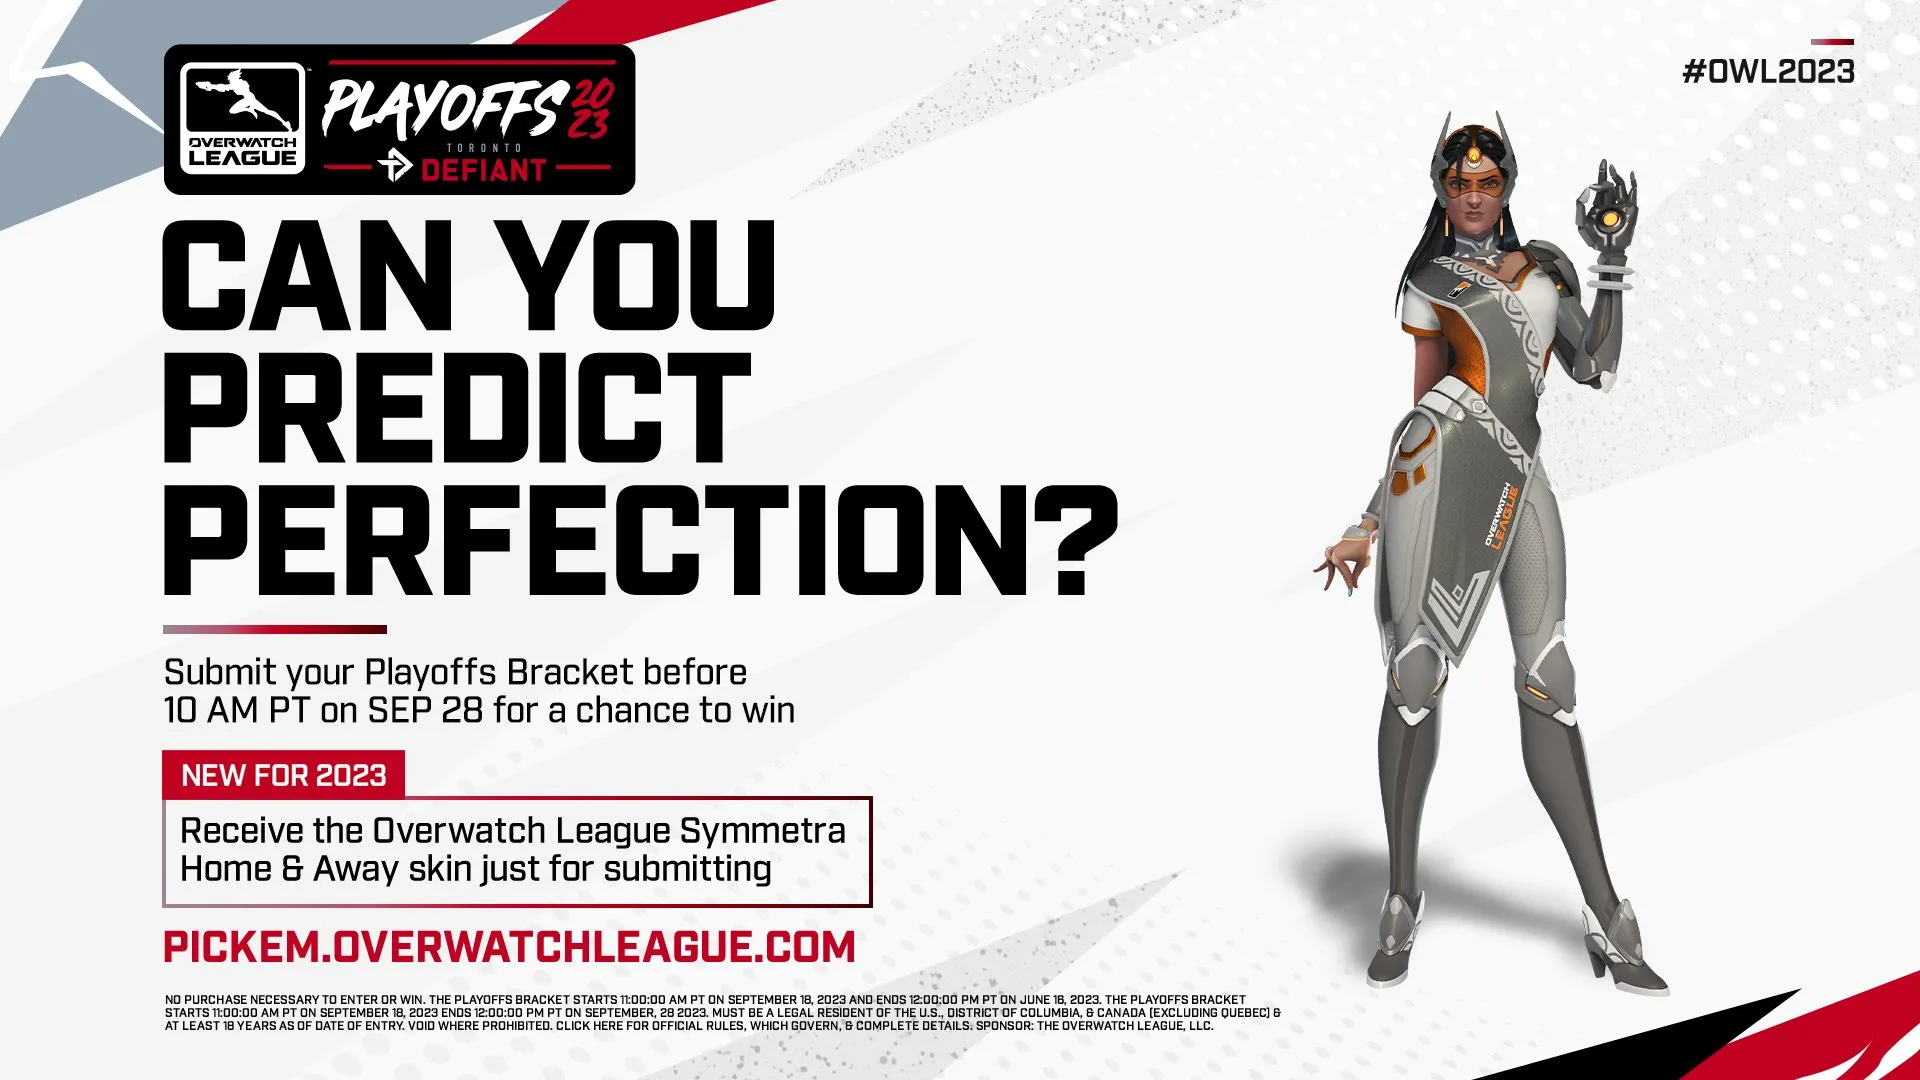 How to Get Overwatch League Symmetra Skins for Free